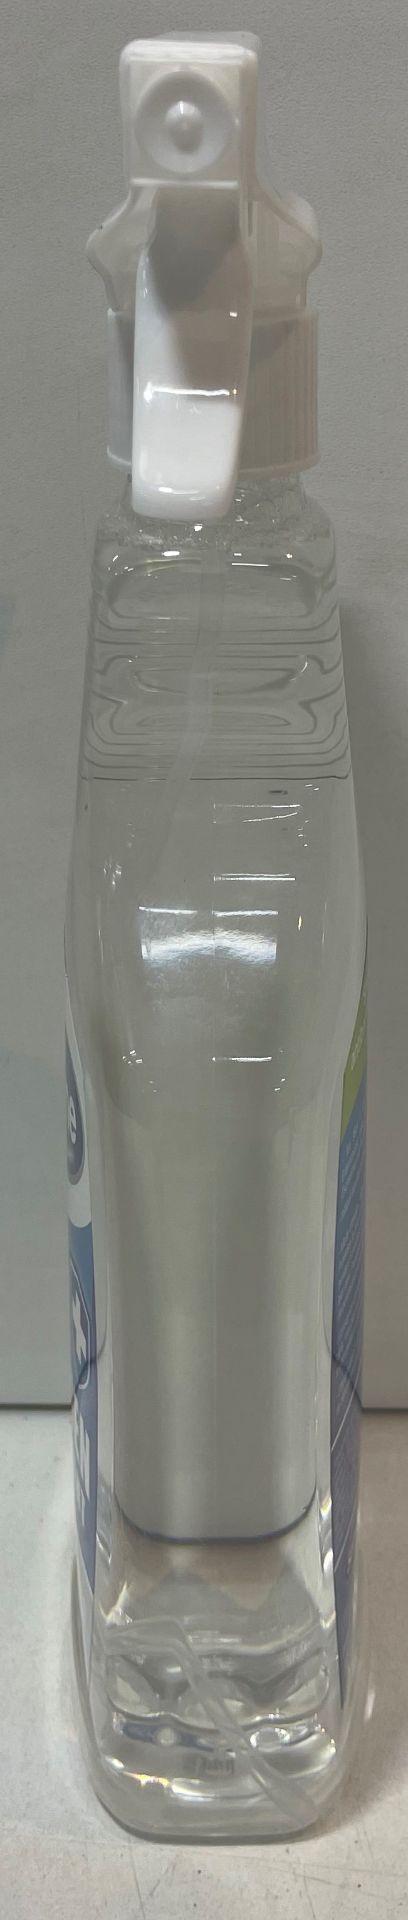 PALLET OF MULTI-PURPOSE ANTI-BACTERIAL SPRAY 750ML - 600 QTY - Image 6 of 7